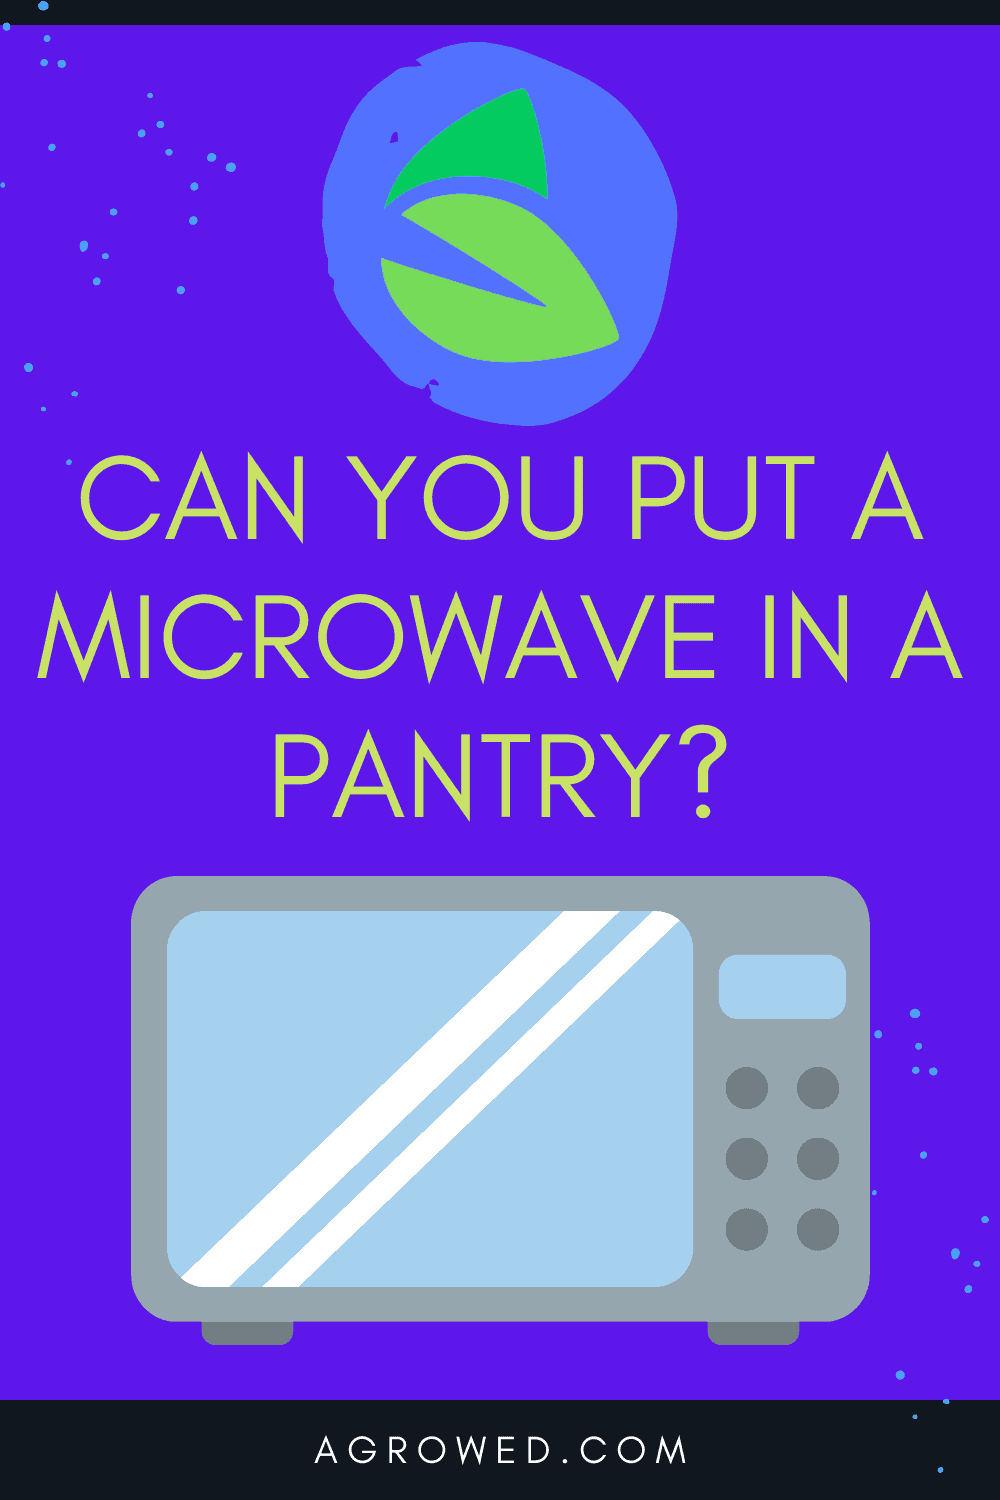 Can You Put a Microwave in a Pantry